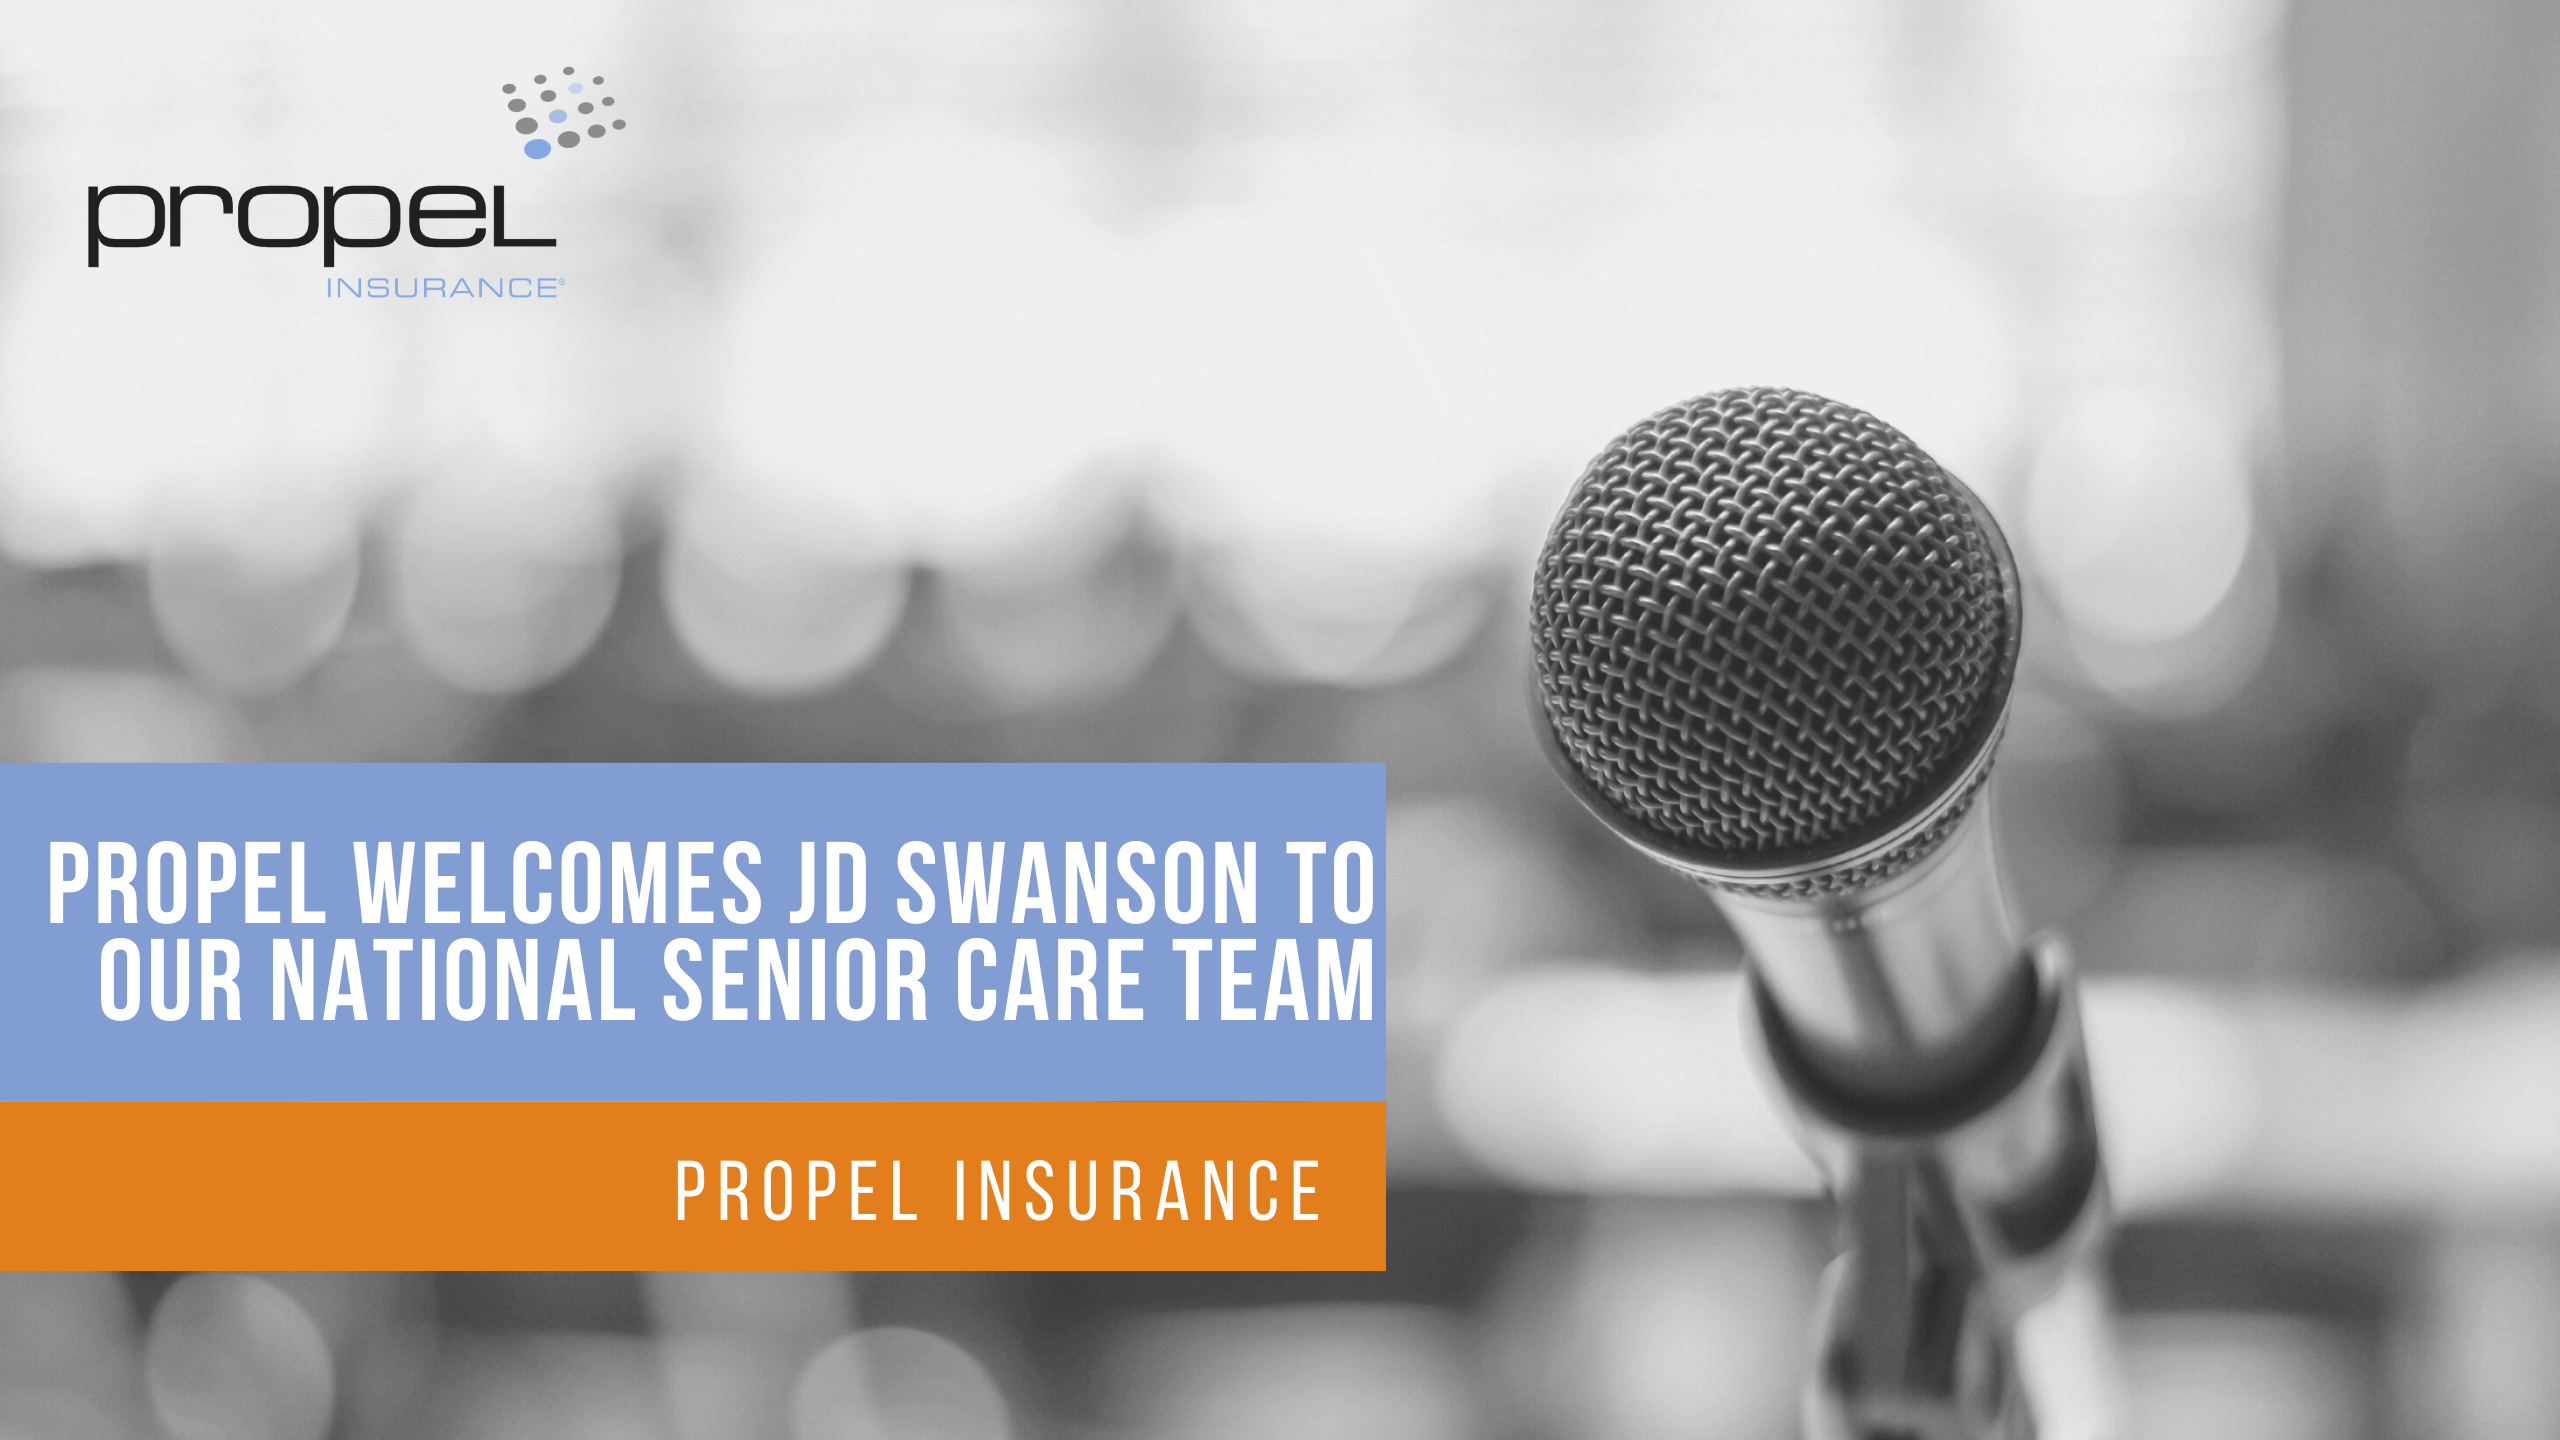 Propel Welcomes JD Swanson To Our National Senior Care Team